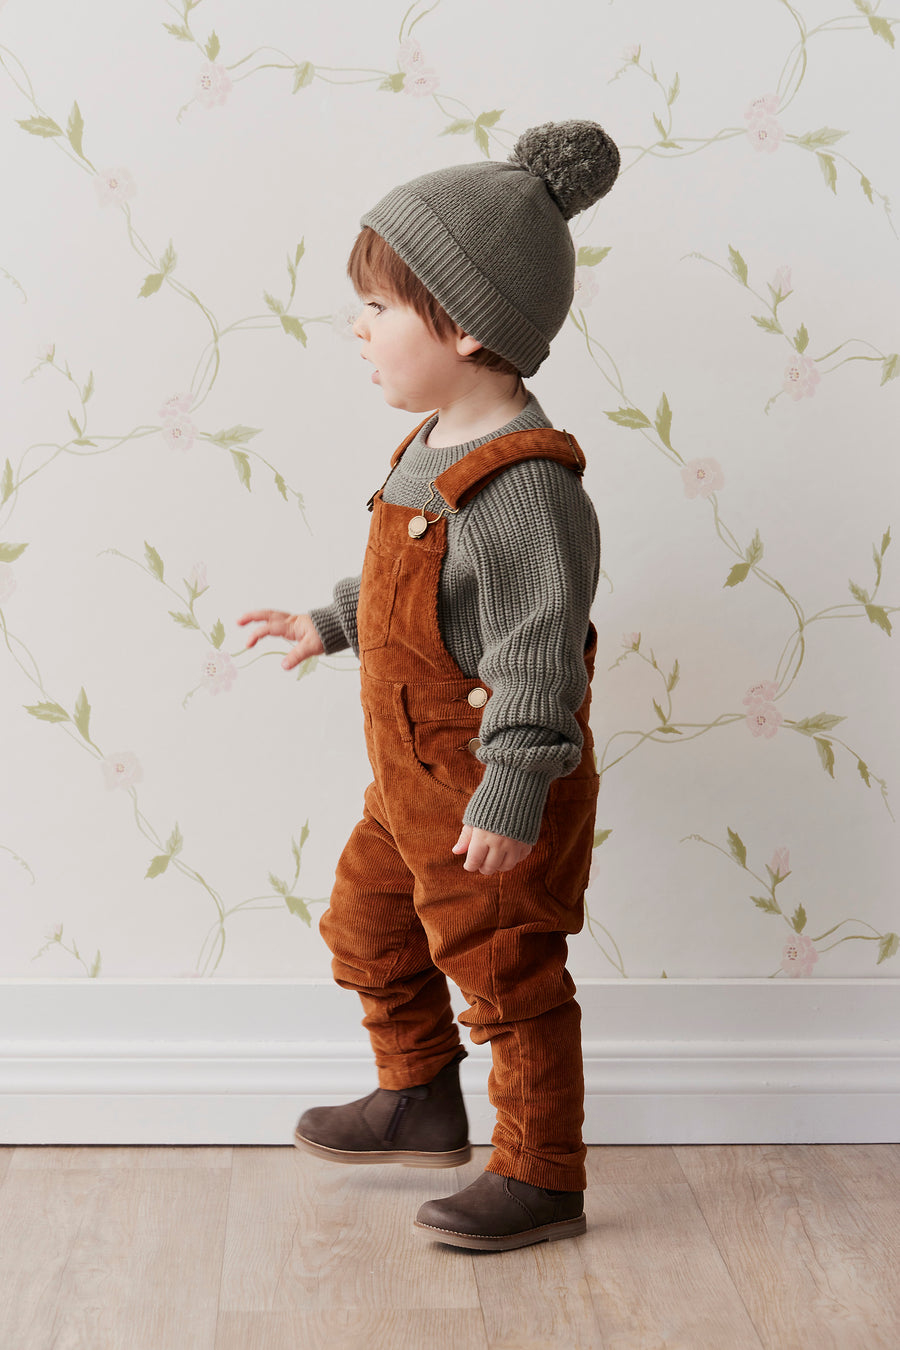 Jordie Cord Overall - Cinnamon Childrens Overall from Jamie Kay NZ